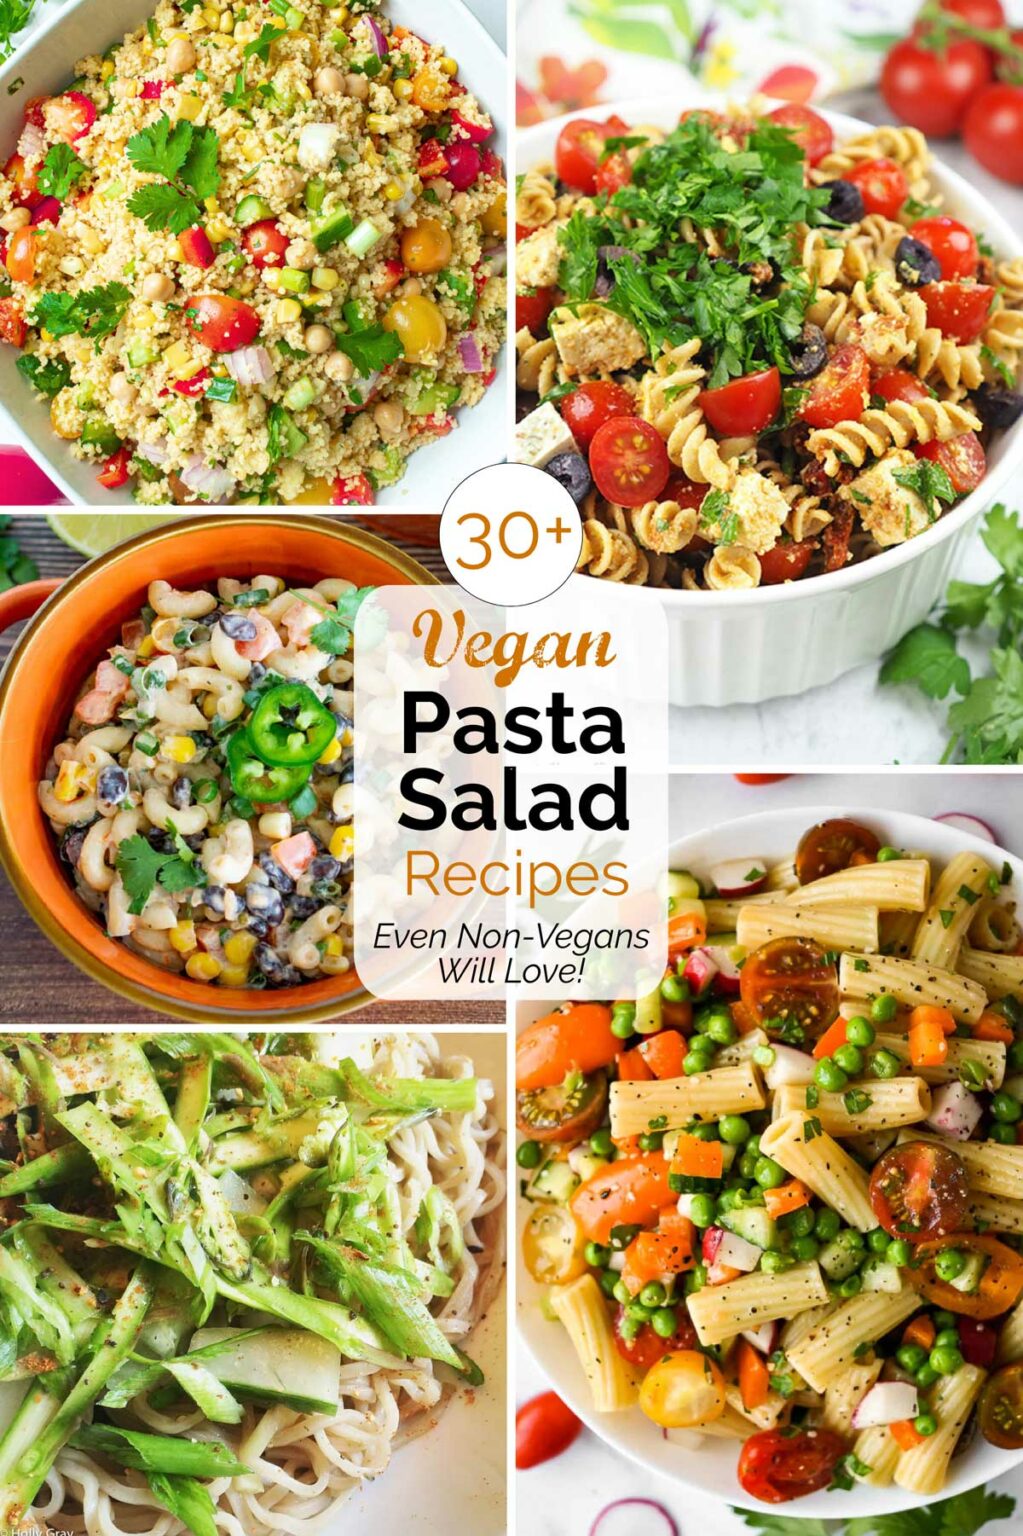 Collage of 5 recipe photos with text overlay "30+ Vegan Pasta Salad Recipes Even Non-Vegans Will Love!".